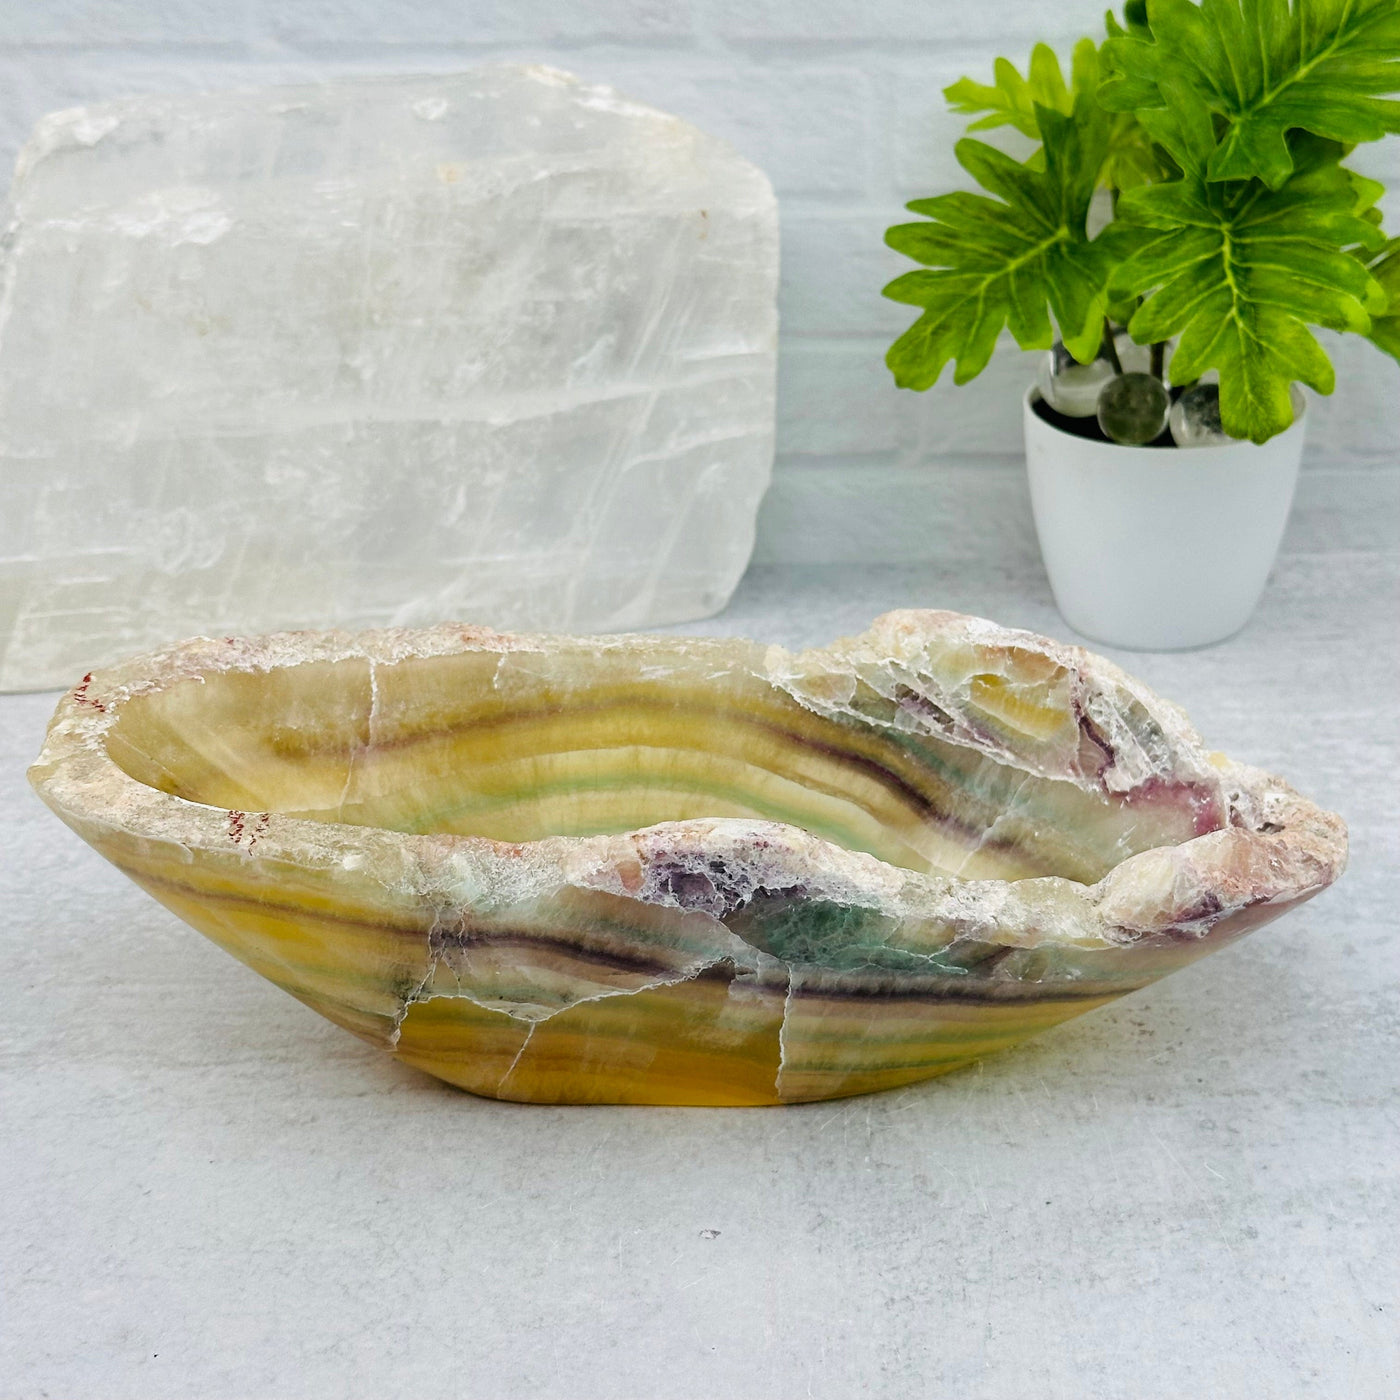 Fluorite Polished Bowl from Mexico displayed as home decor